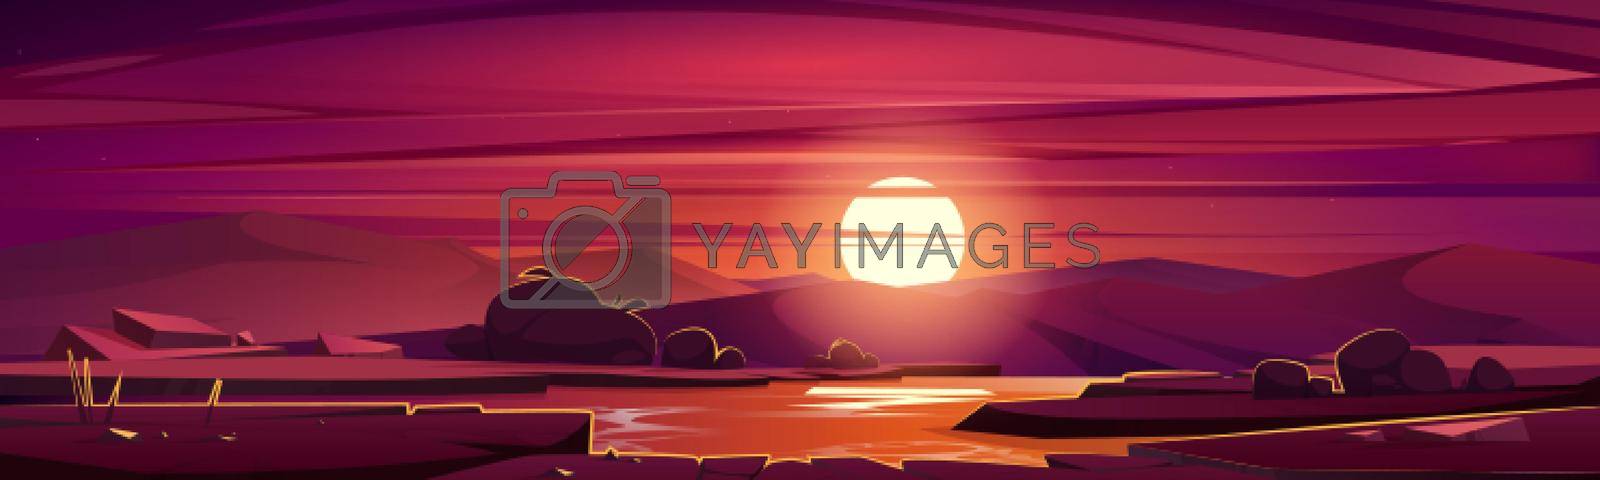 Royalty free image of Cartoon nature landscape beautiful sunset at field by vectorart